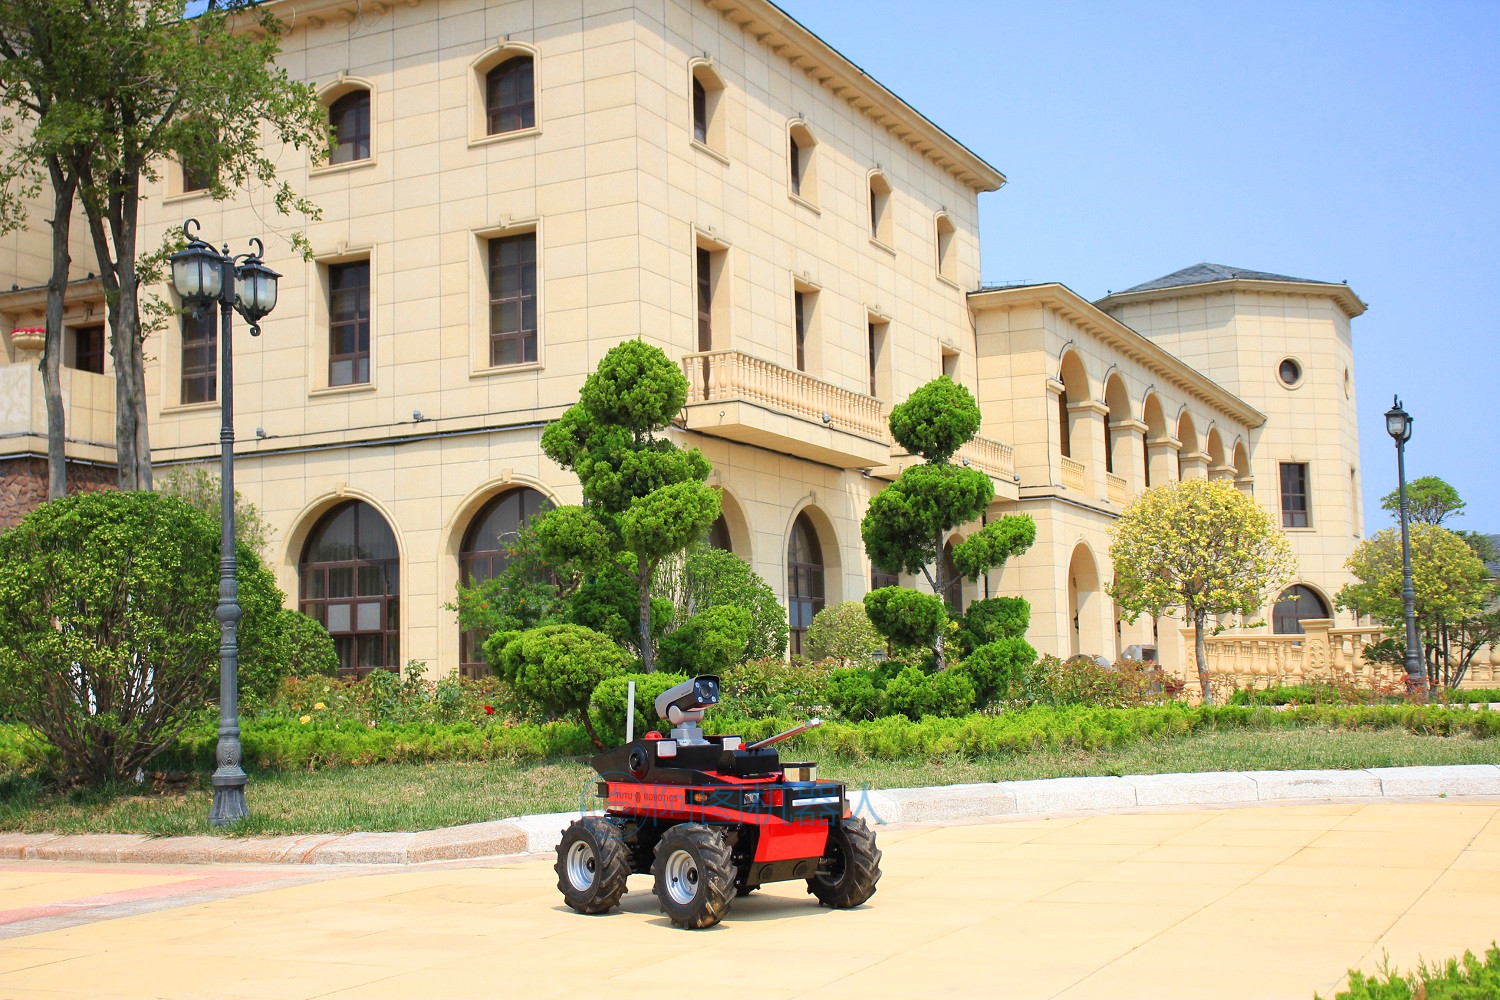 WT1000 Autonomous Unmanned Ground Vehicles Security Patrol Robot Indoor And Outdoor Patrolling